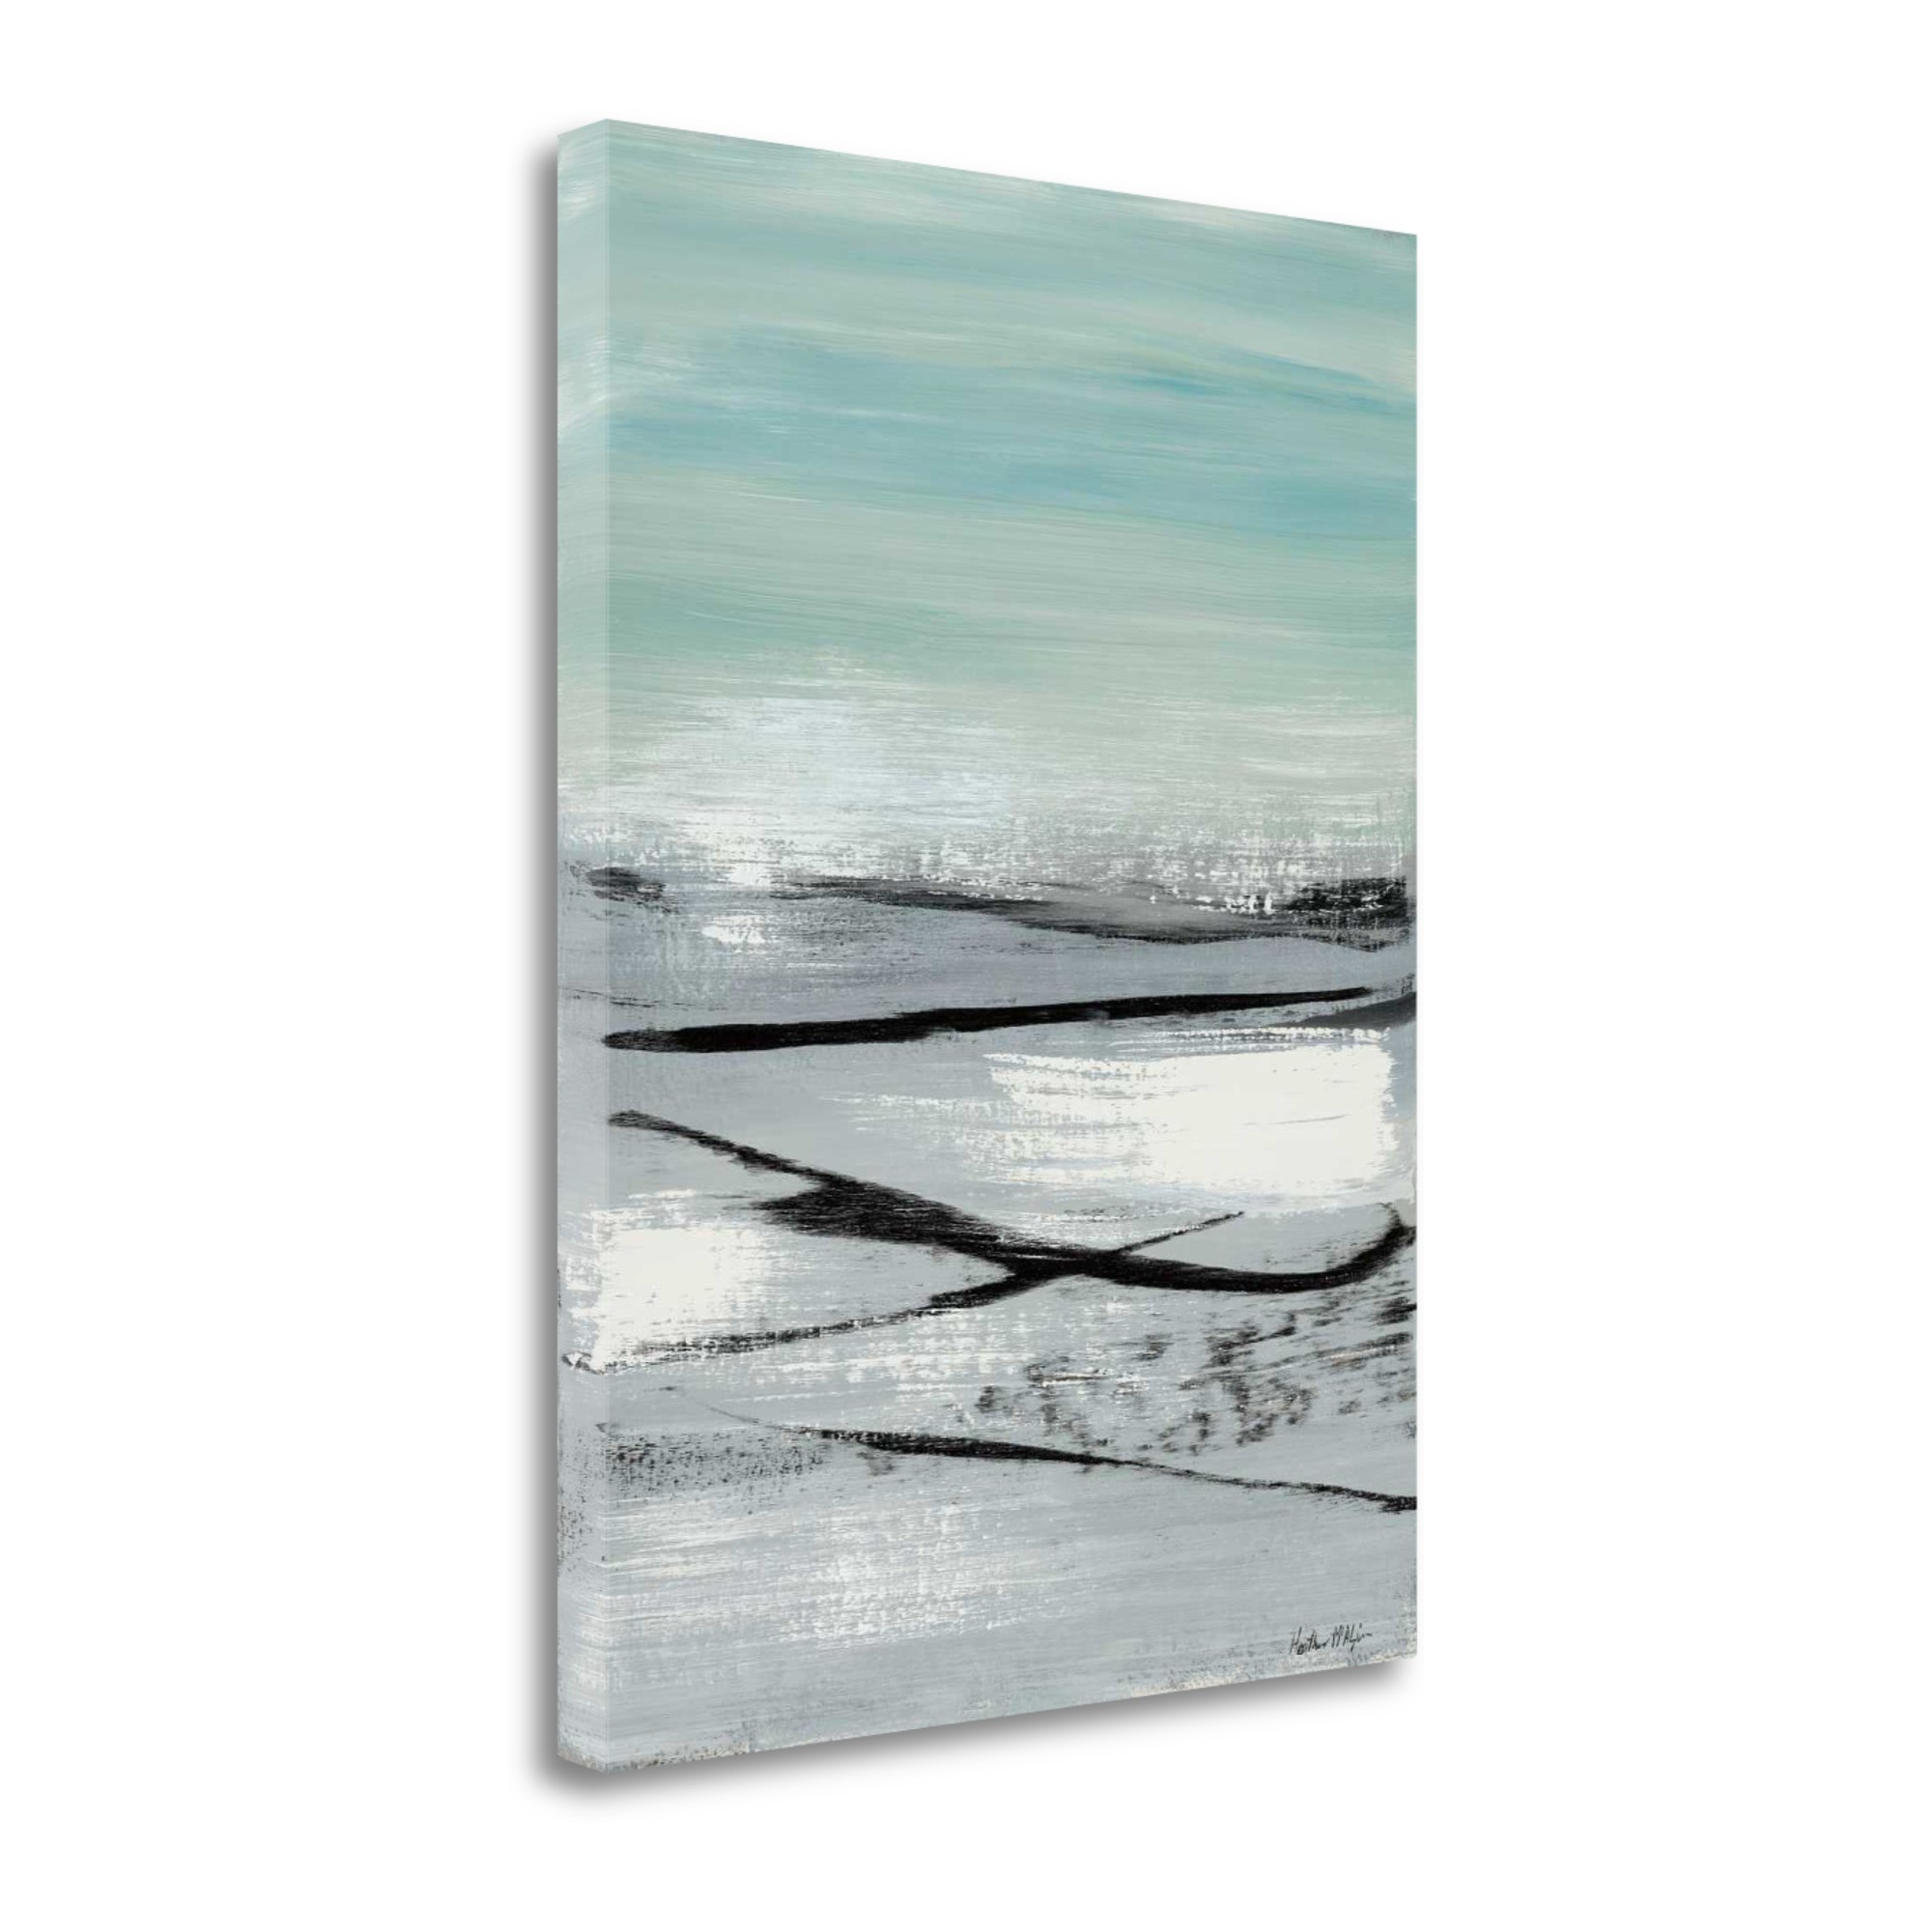 18" Blue Abstract Beach Painting Giclee Print on Gallery Wrap Canvas Wall Art